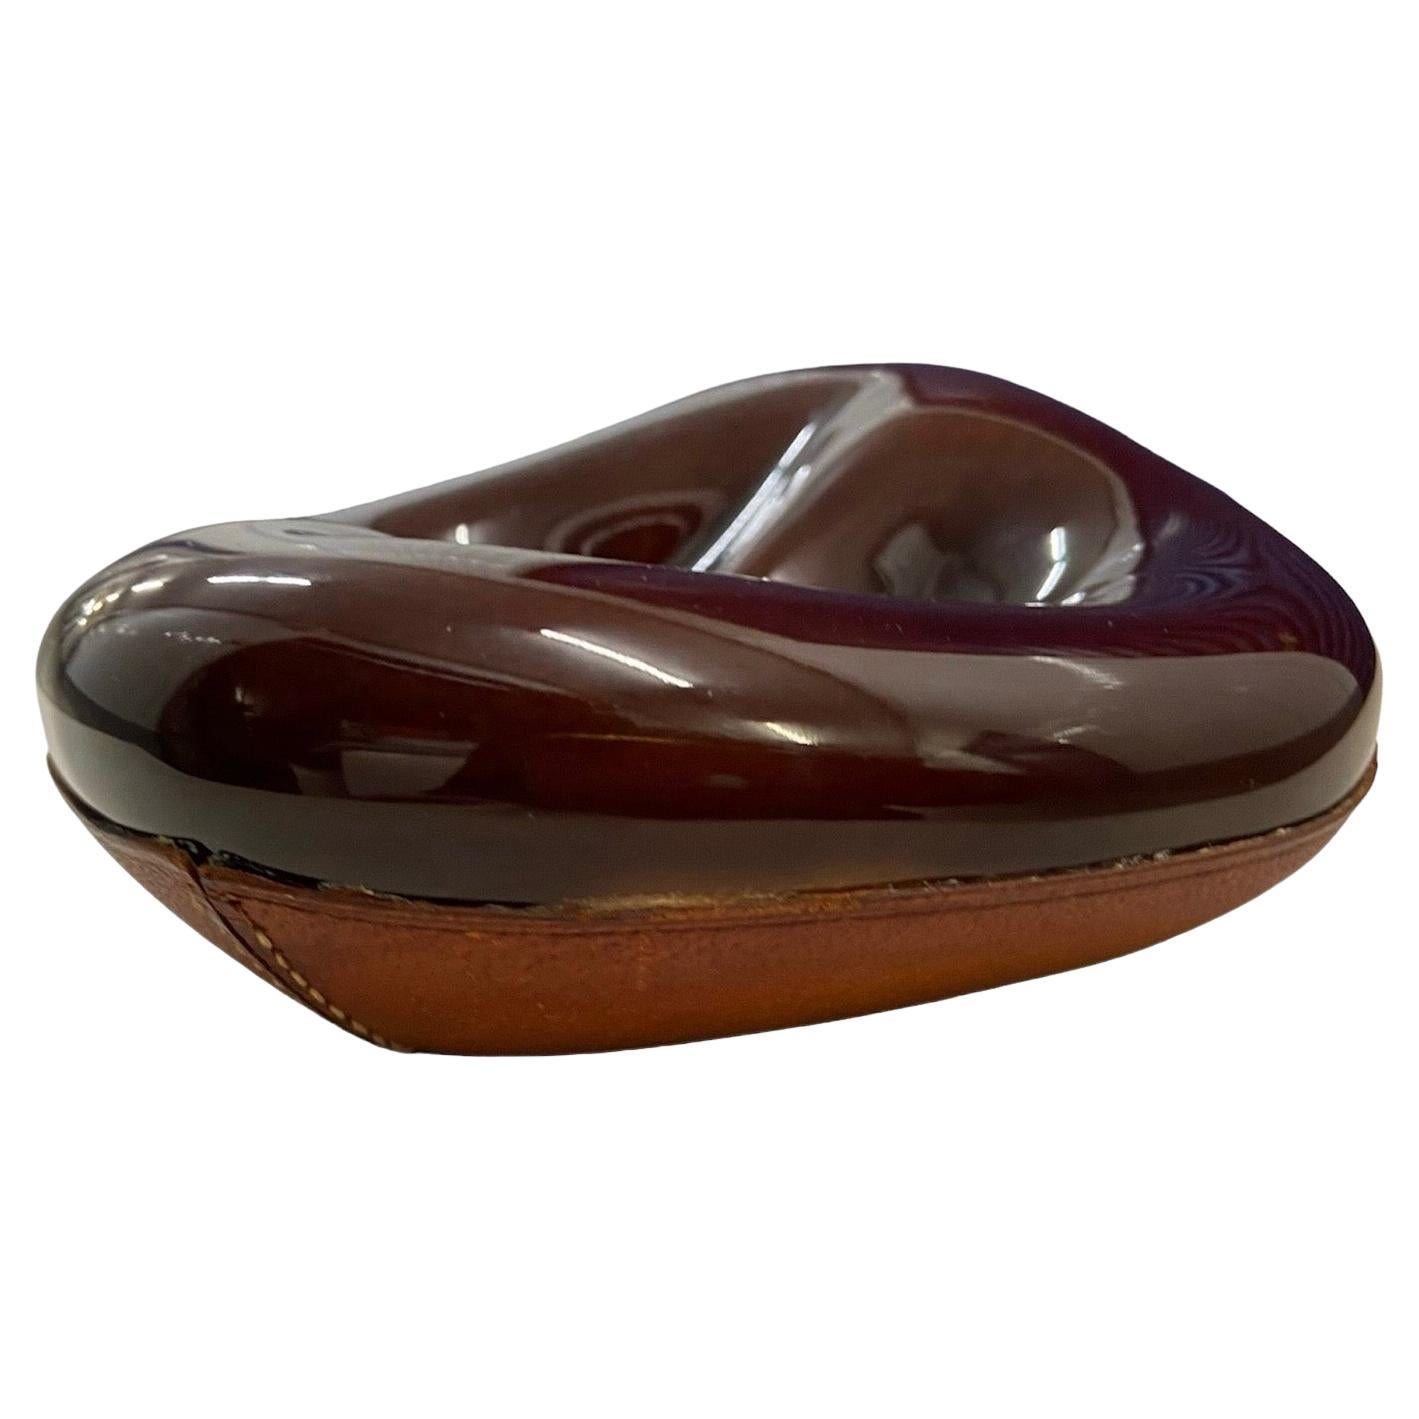 1950's Longchamp leather and ceramic pipe holder, ashtray, dish, signed / stamped in the leather, Lonchamp Paris.
French, circa 1955.
Beautiful organic shape.
This design is often attributed to Georges Jouve. 
Please note that our handling time is